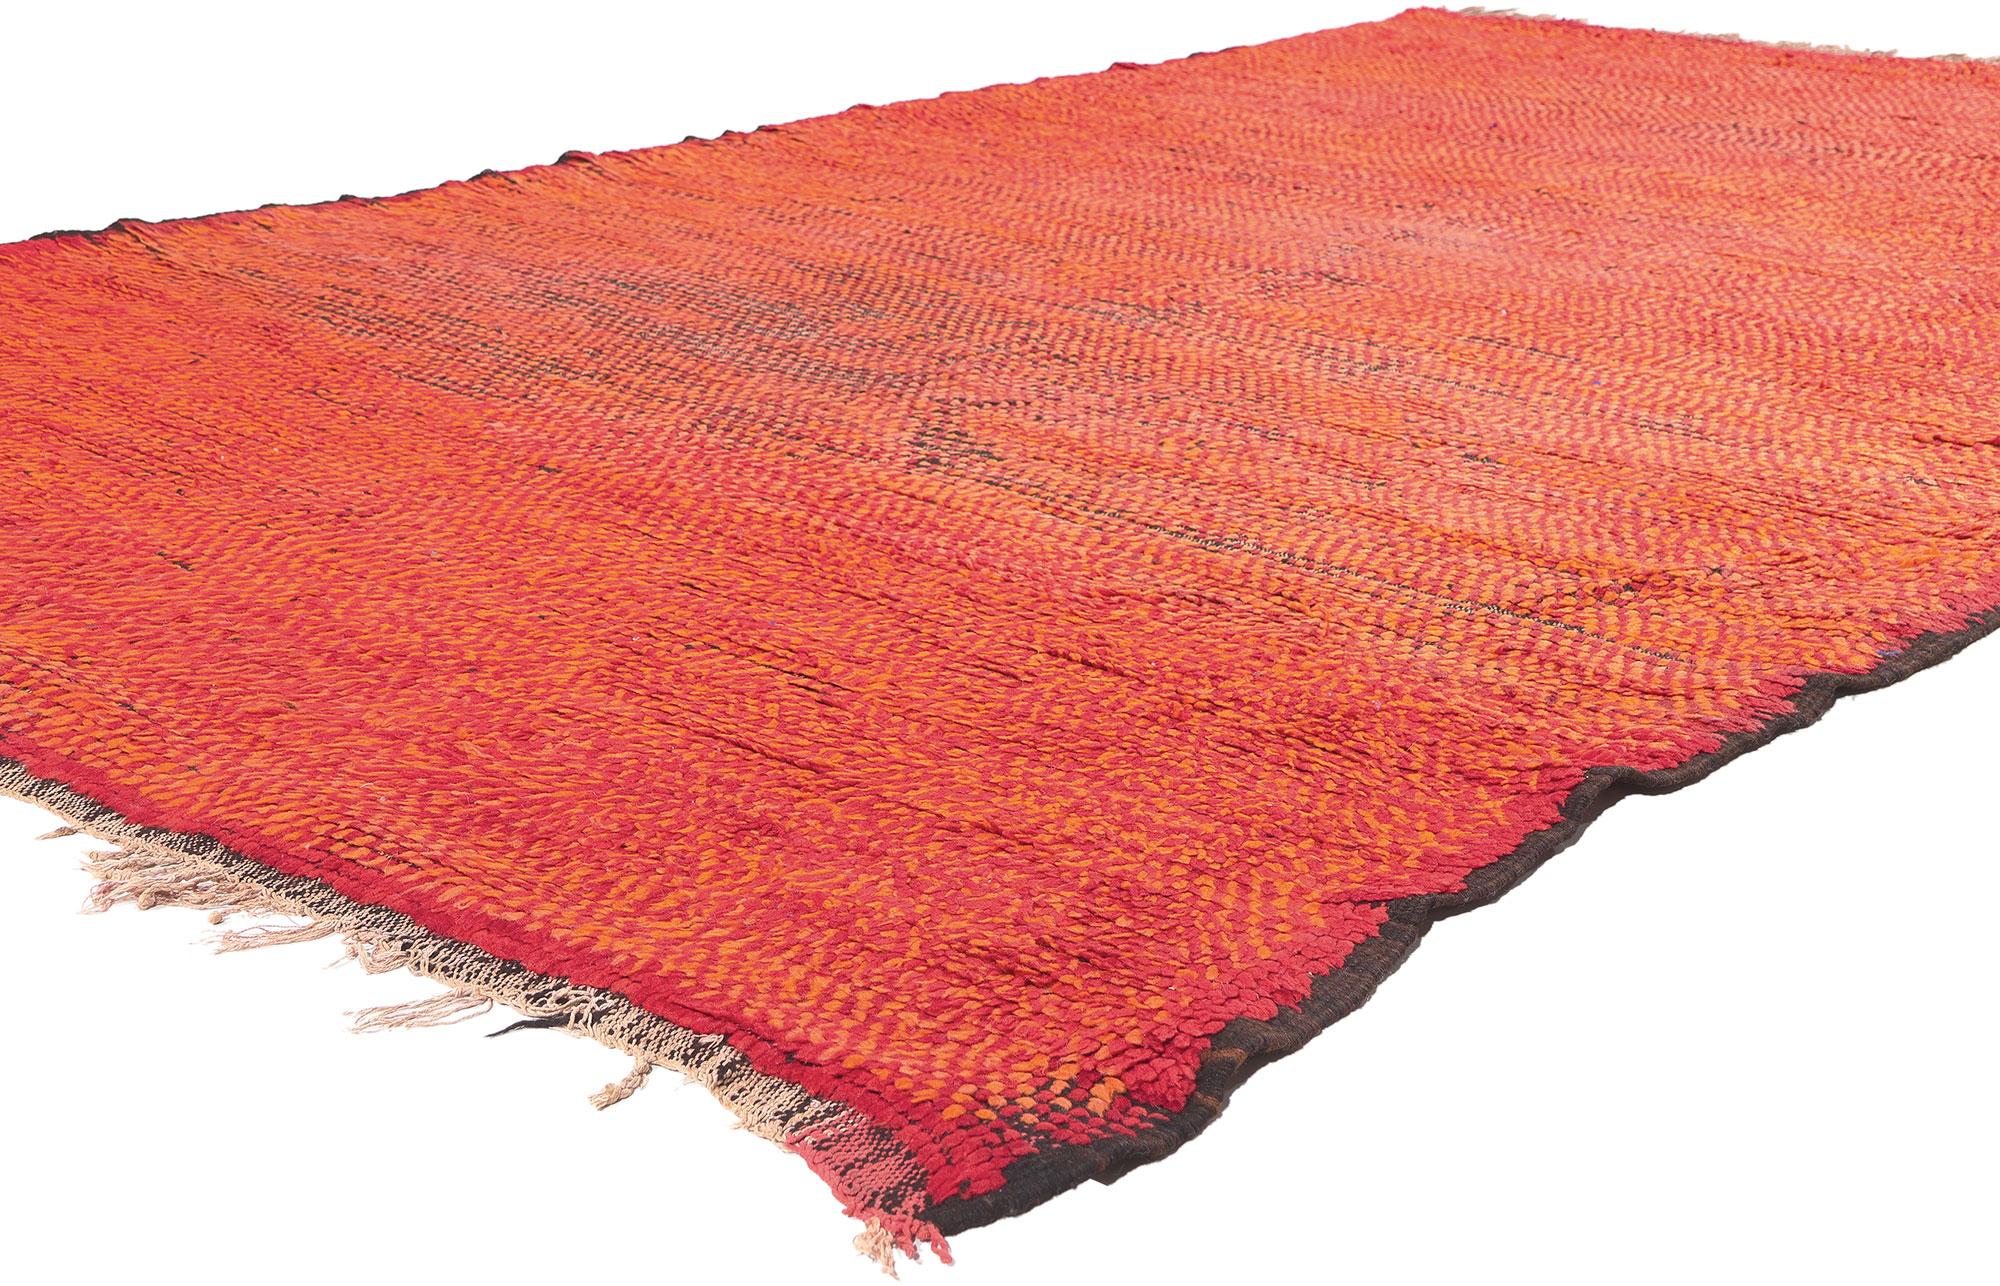 20996 Vintage Red Boujad Moroccan Rug, 06'00 x 10'00. Embrace the spirited essence of Boujad rugs, hailing from the vibrant city of Boujad in the Khouribga region, Moroccan rugs like this are celebrated for their eccentric and artistic designs.